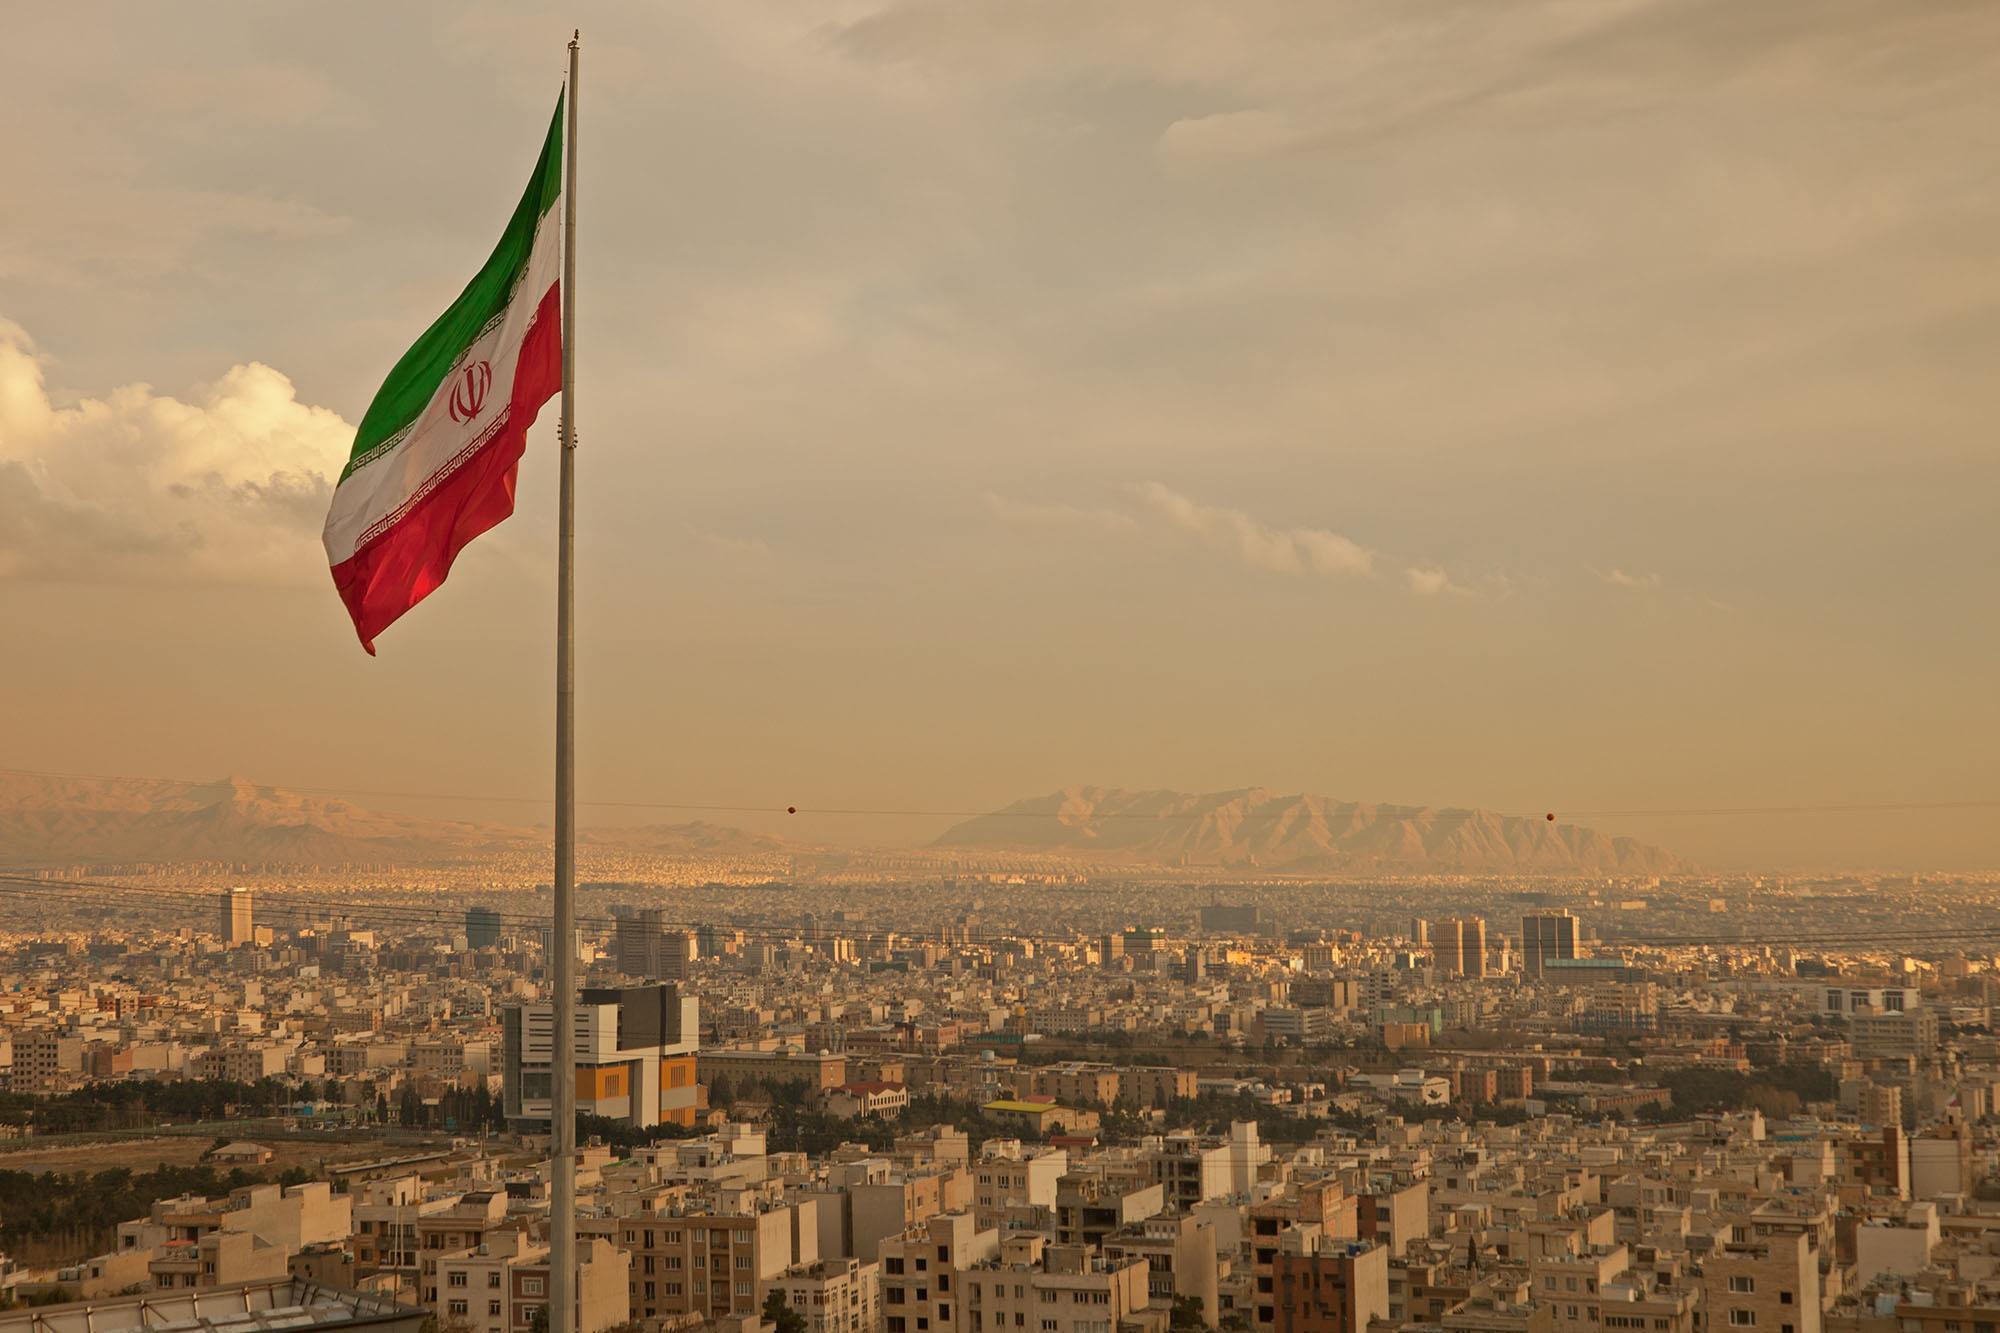 ifmat - Keysight Technologies to pay fine for sanctioned dealings in Iran